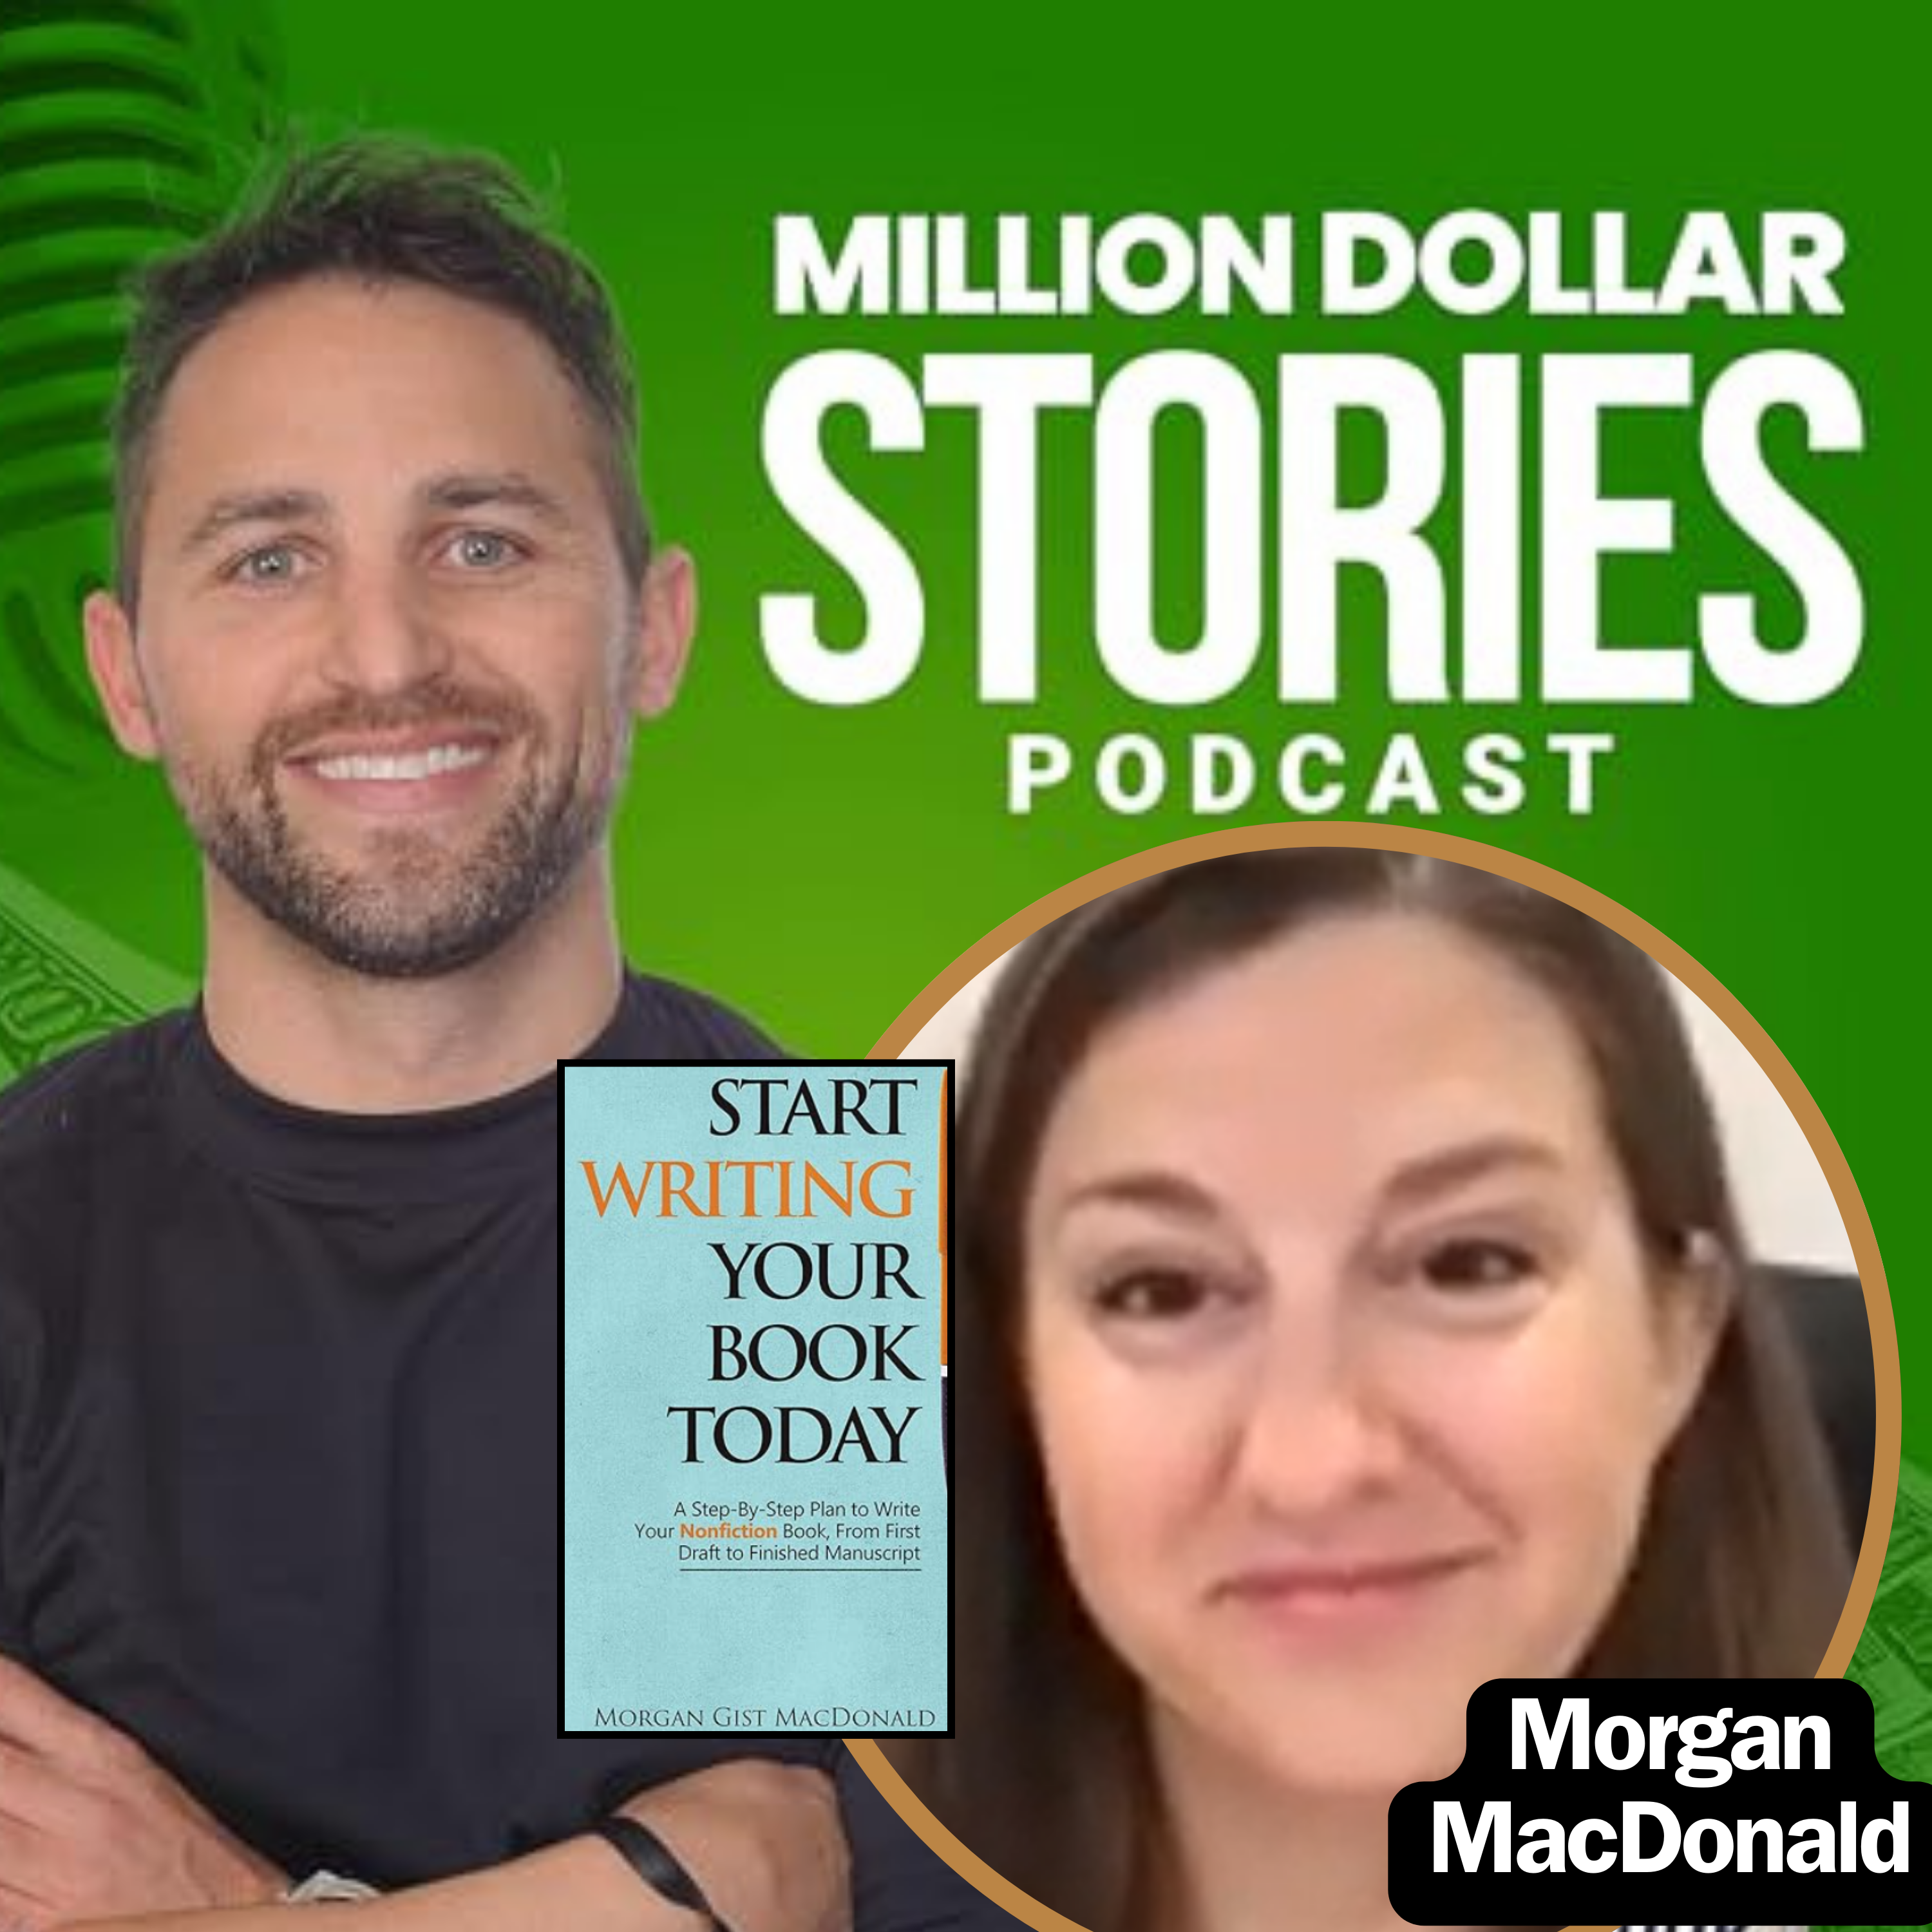 Morgan Gist MacDonald – Author of “Start Writing Your Book Today: A Step-by-Step Plan to Write Your Nonfiction Book, From First Draft to Finished Manuscript”